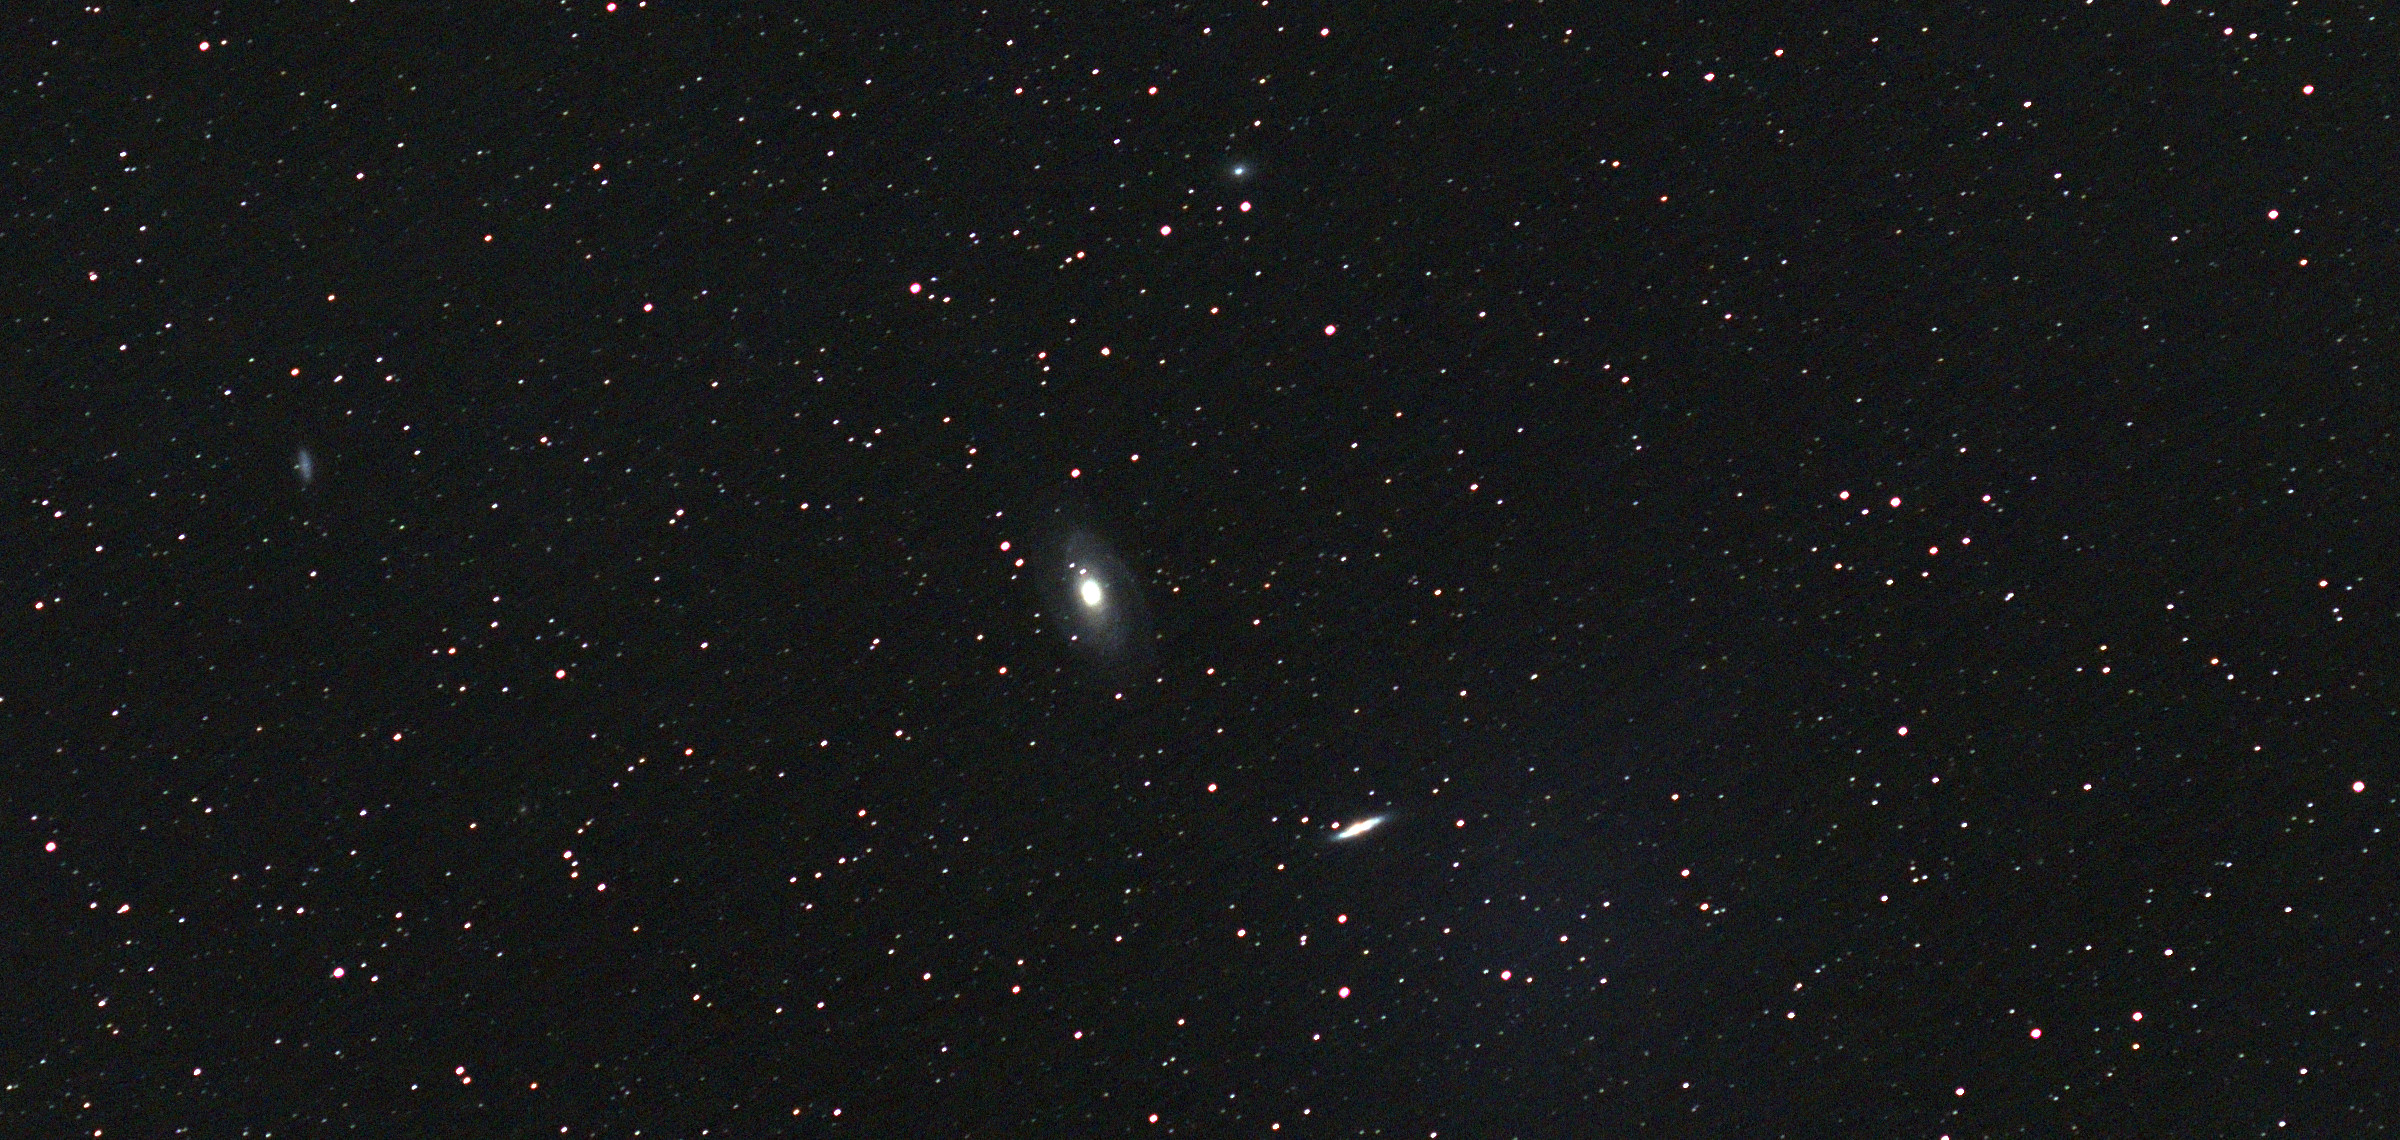 Bode and Cigar Galaxies (M81 and M82). Fantastic targets for beginners to photograph in May or June.